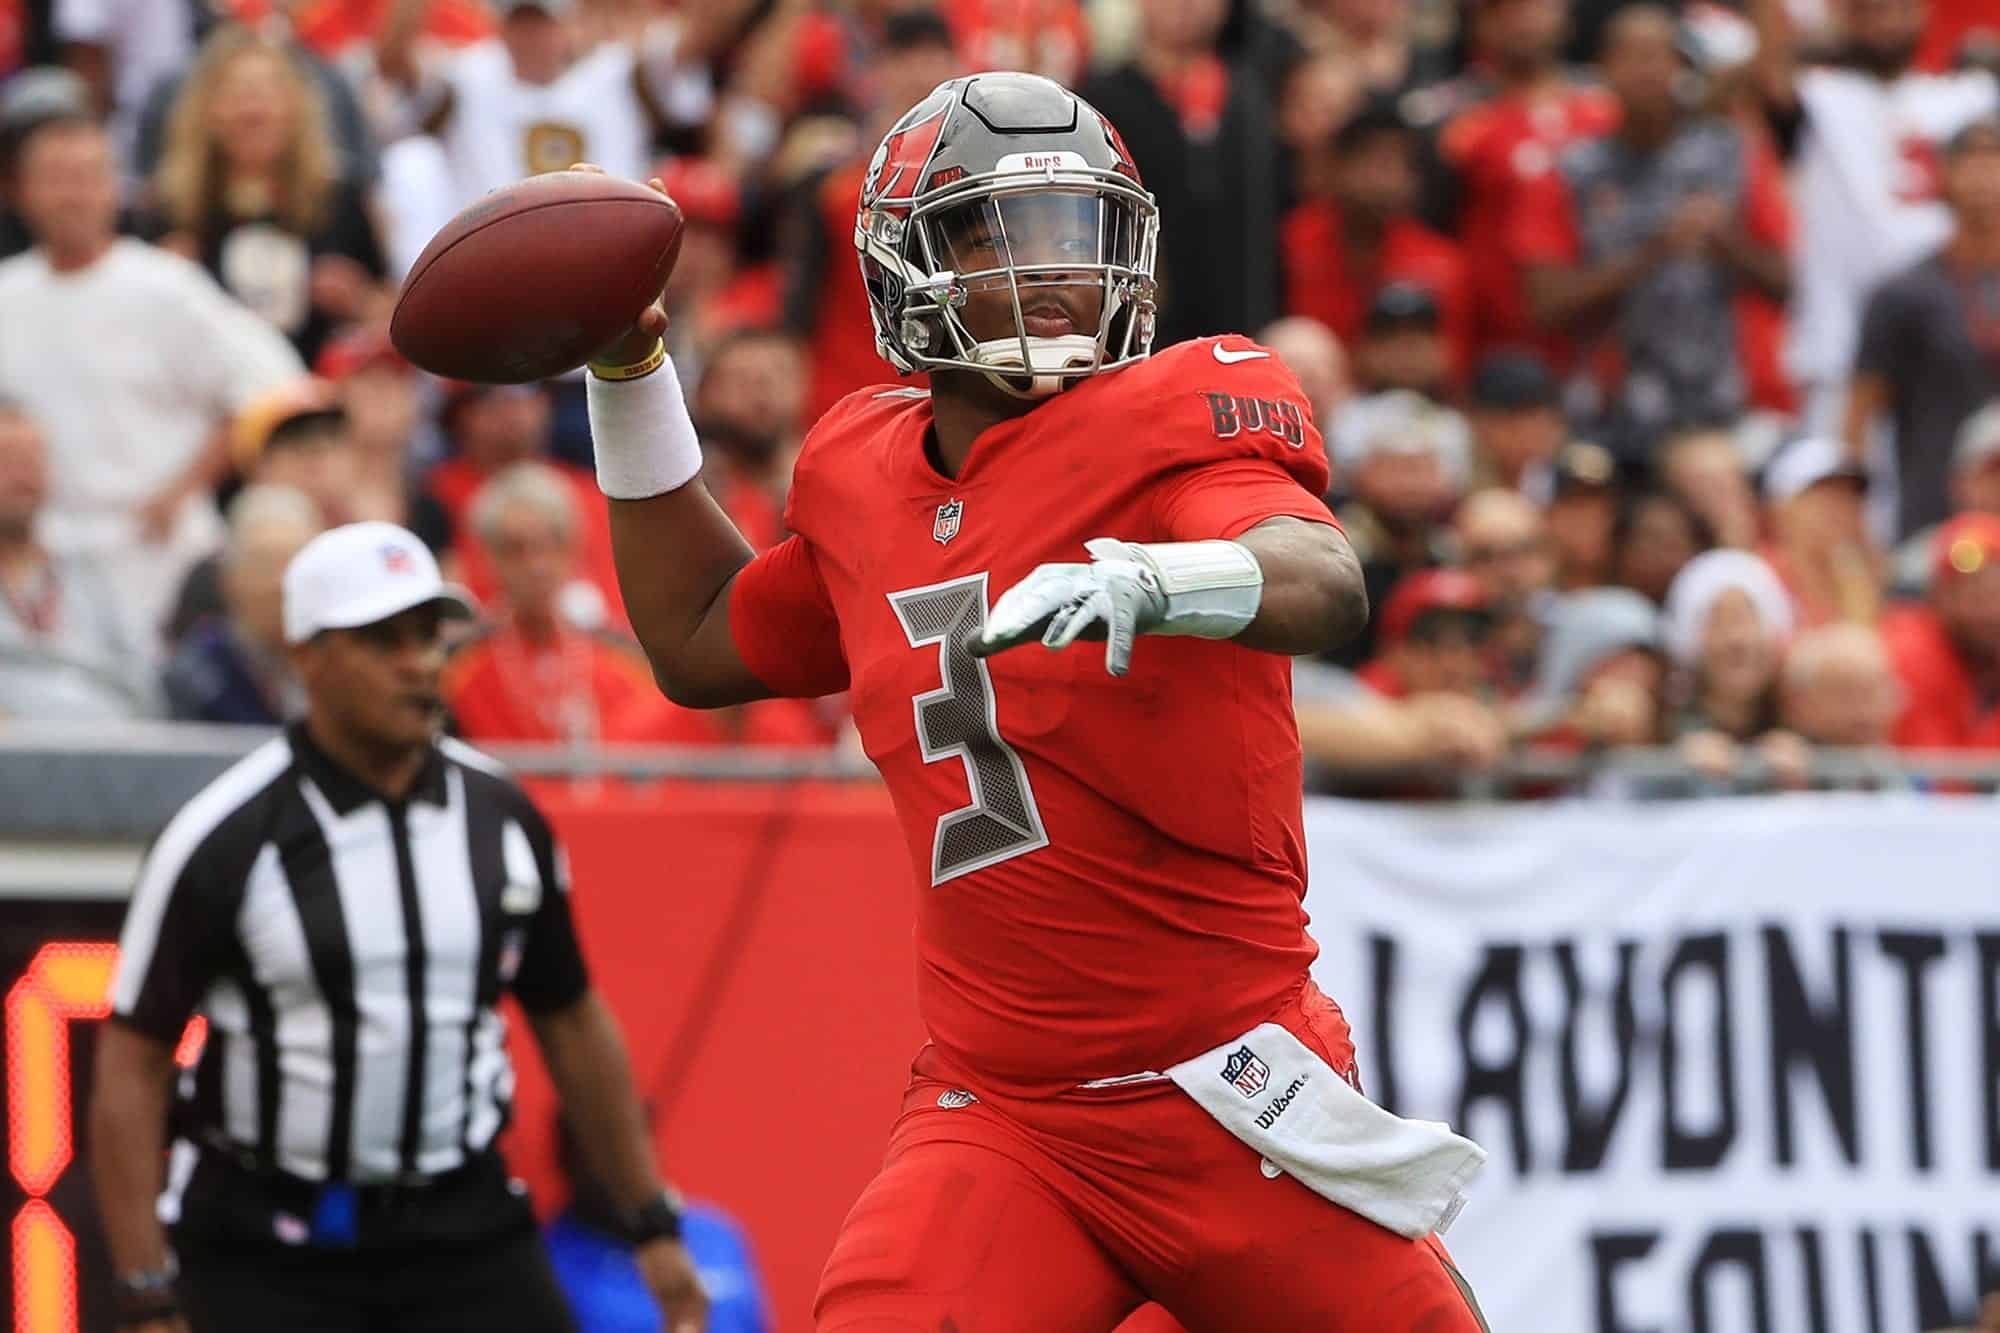 Tampa Bay Buccaneers: How good can Jameis Winston be?